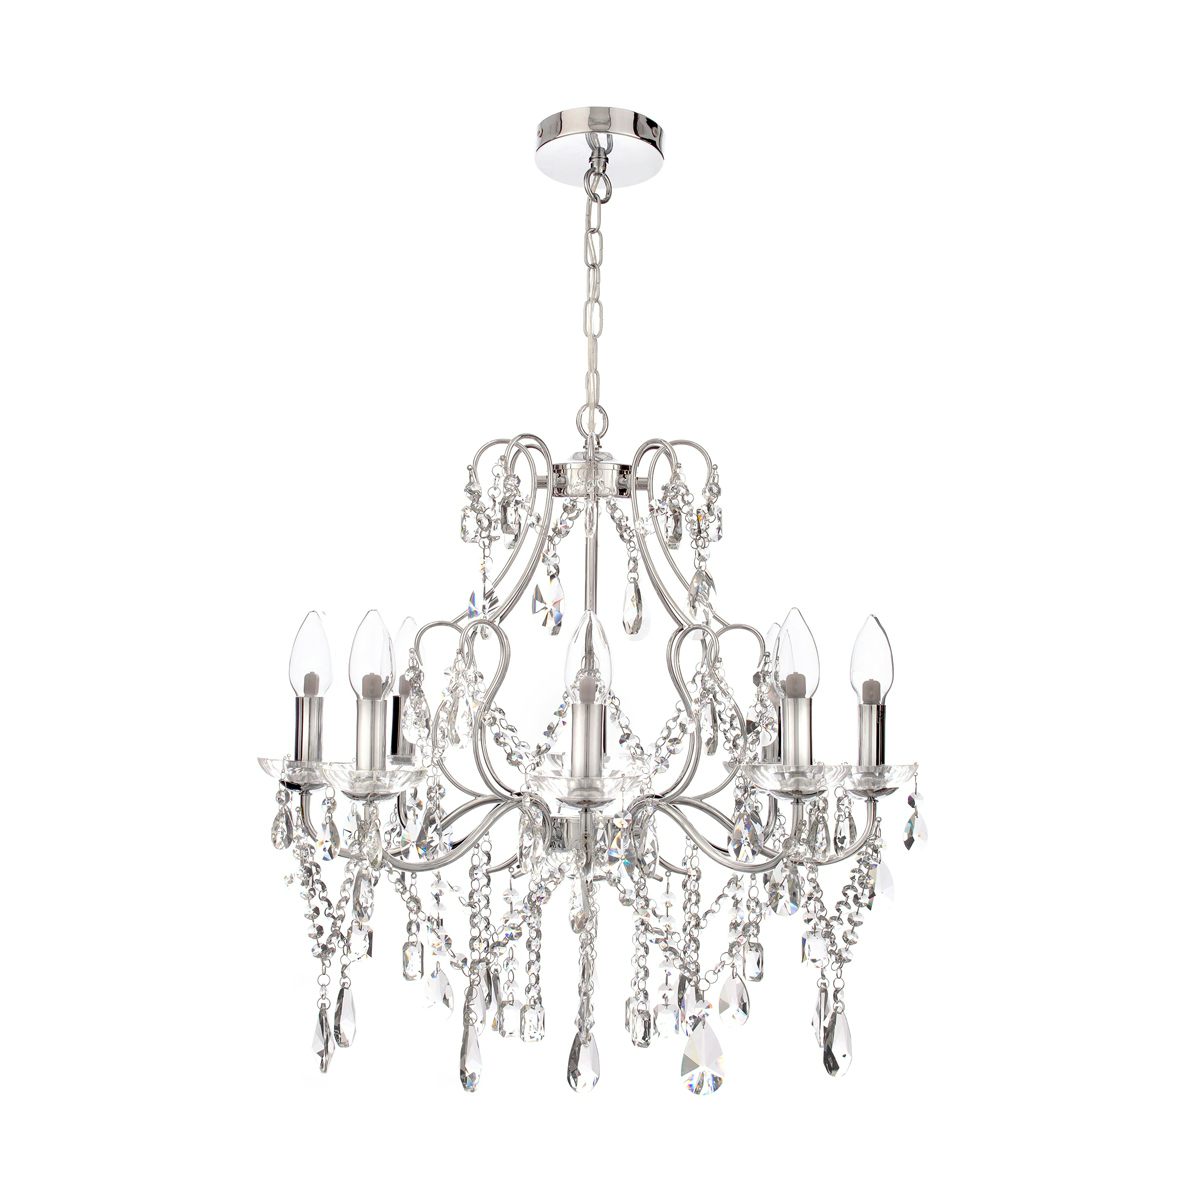 Marquis by Waterford Annalee 8 light bathroom chandelier